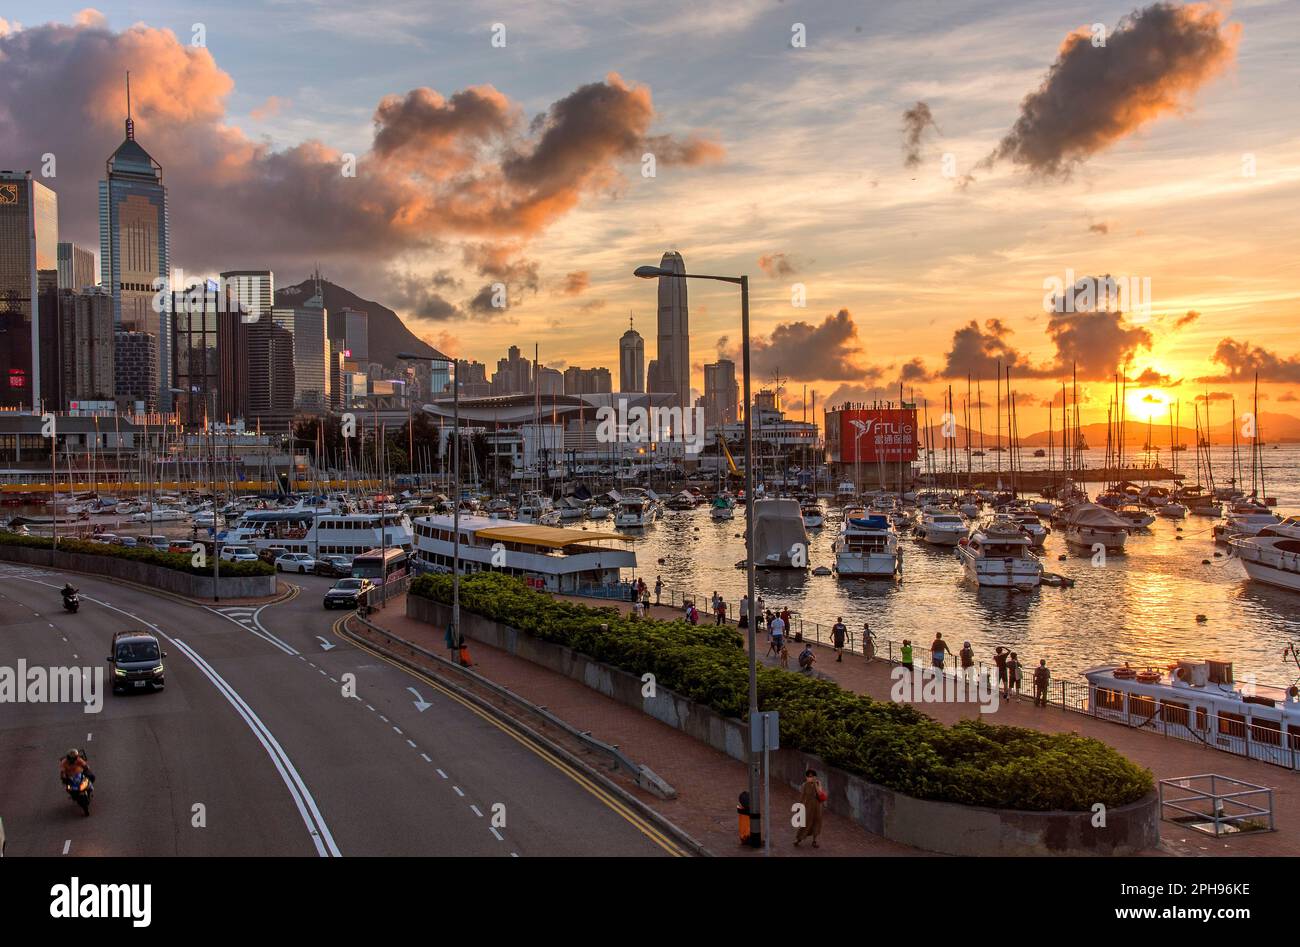 View of Causeway Bay Typhoon Shelter and city skyline at sunset from a footbridge near the Noon Day Gun Stock Photo